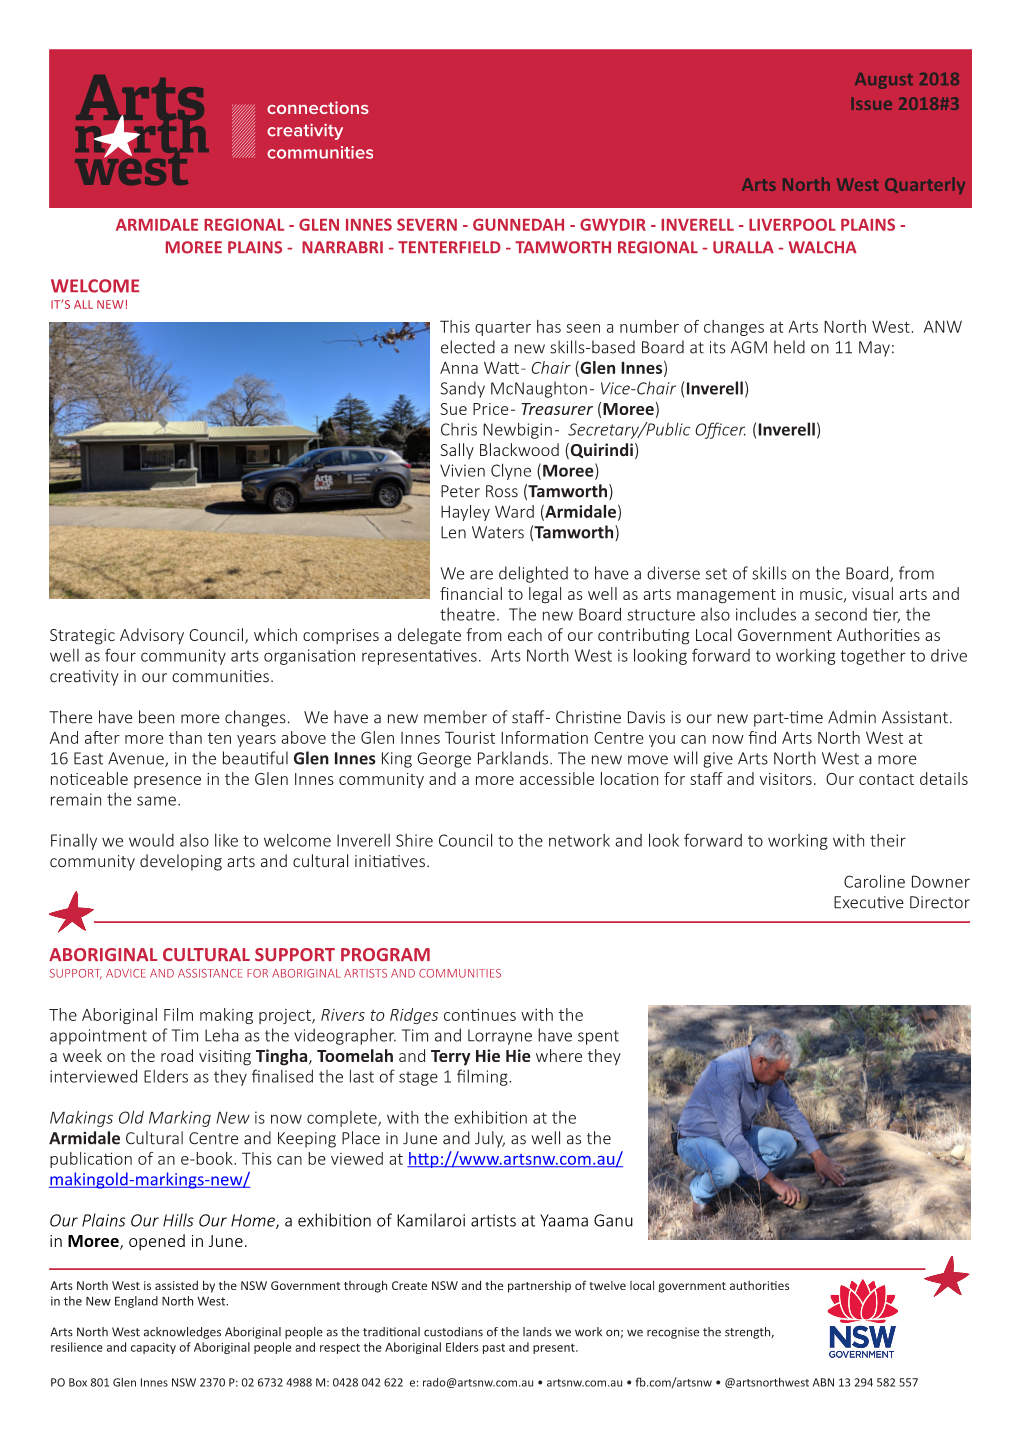 Arts North West Quarterly August 2018 Issue 2018#3 WELCOME ABORIGINAL CULTURAL SUPPORT PROGRAM